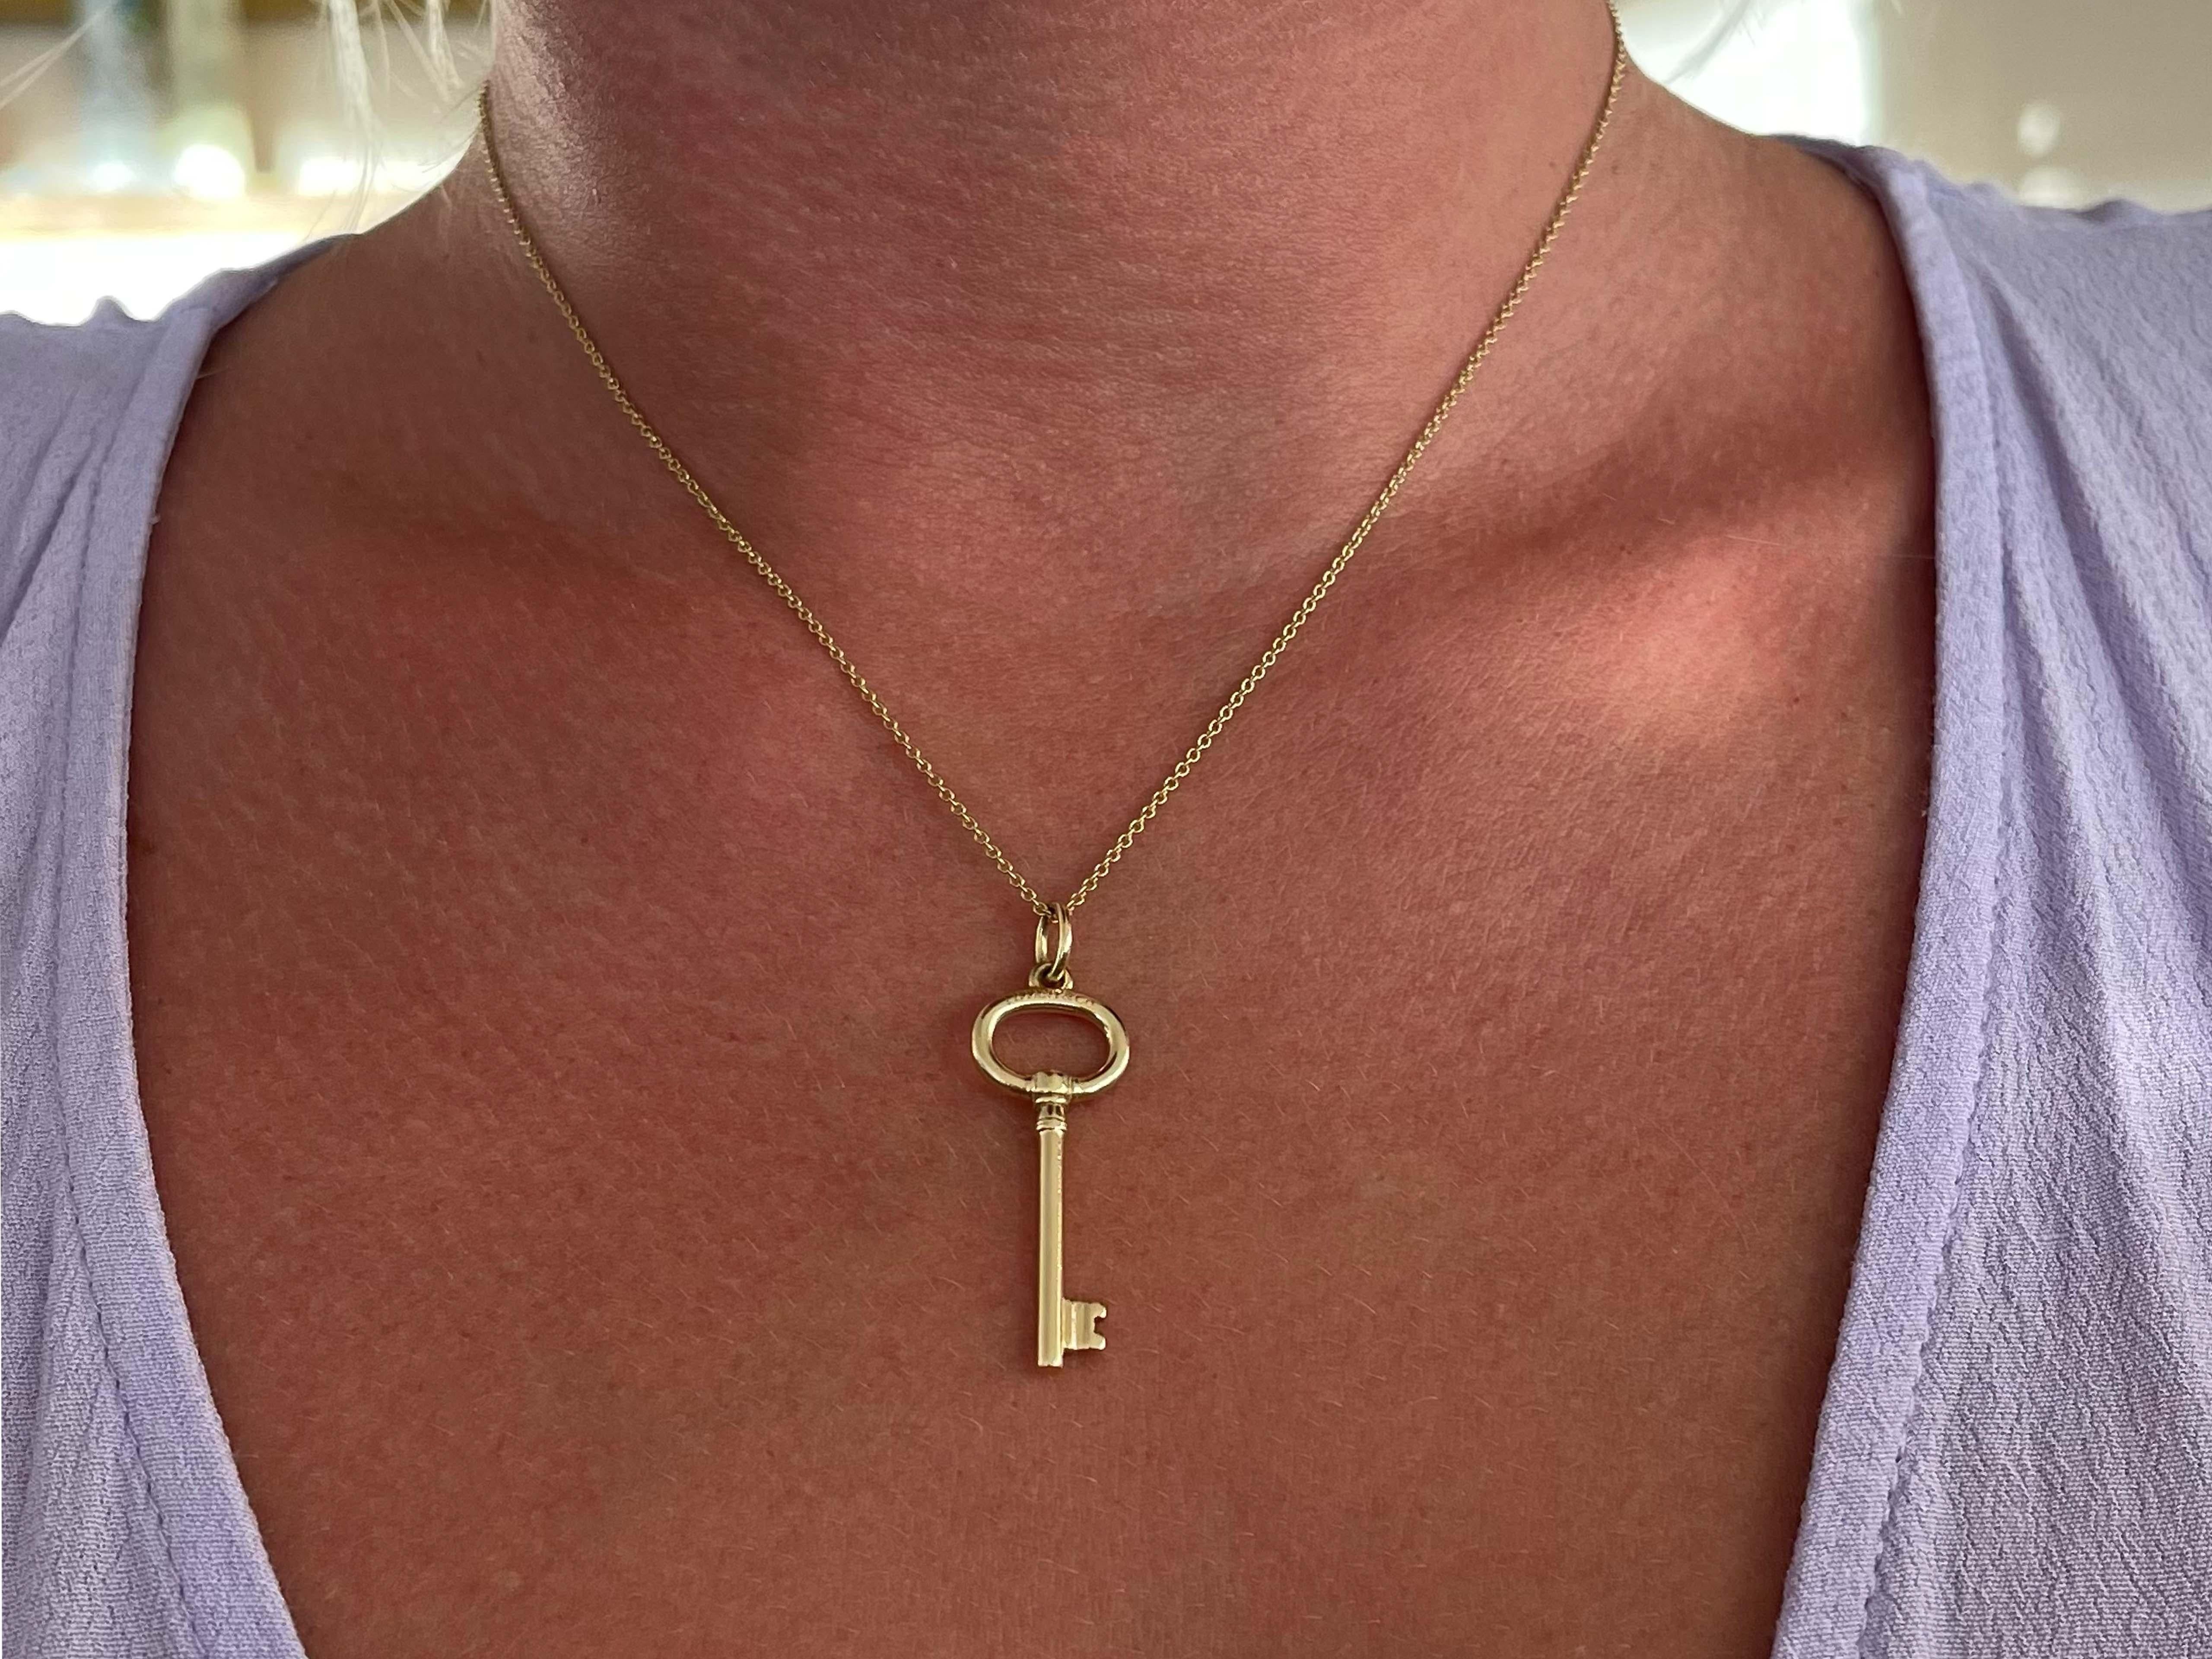 This key pendant necklace is an ageless classic design by Tiffany & Co. The key design comes in various different models, however the oval key pendant is the most iconic and classic of the collection. This pendant and chain is crafted in 18k yellow